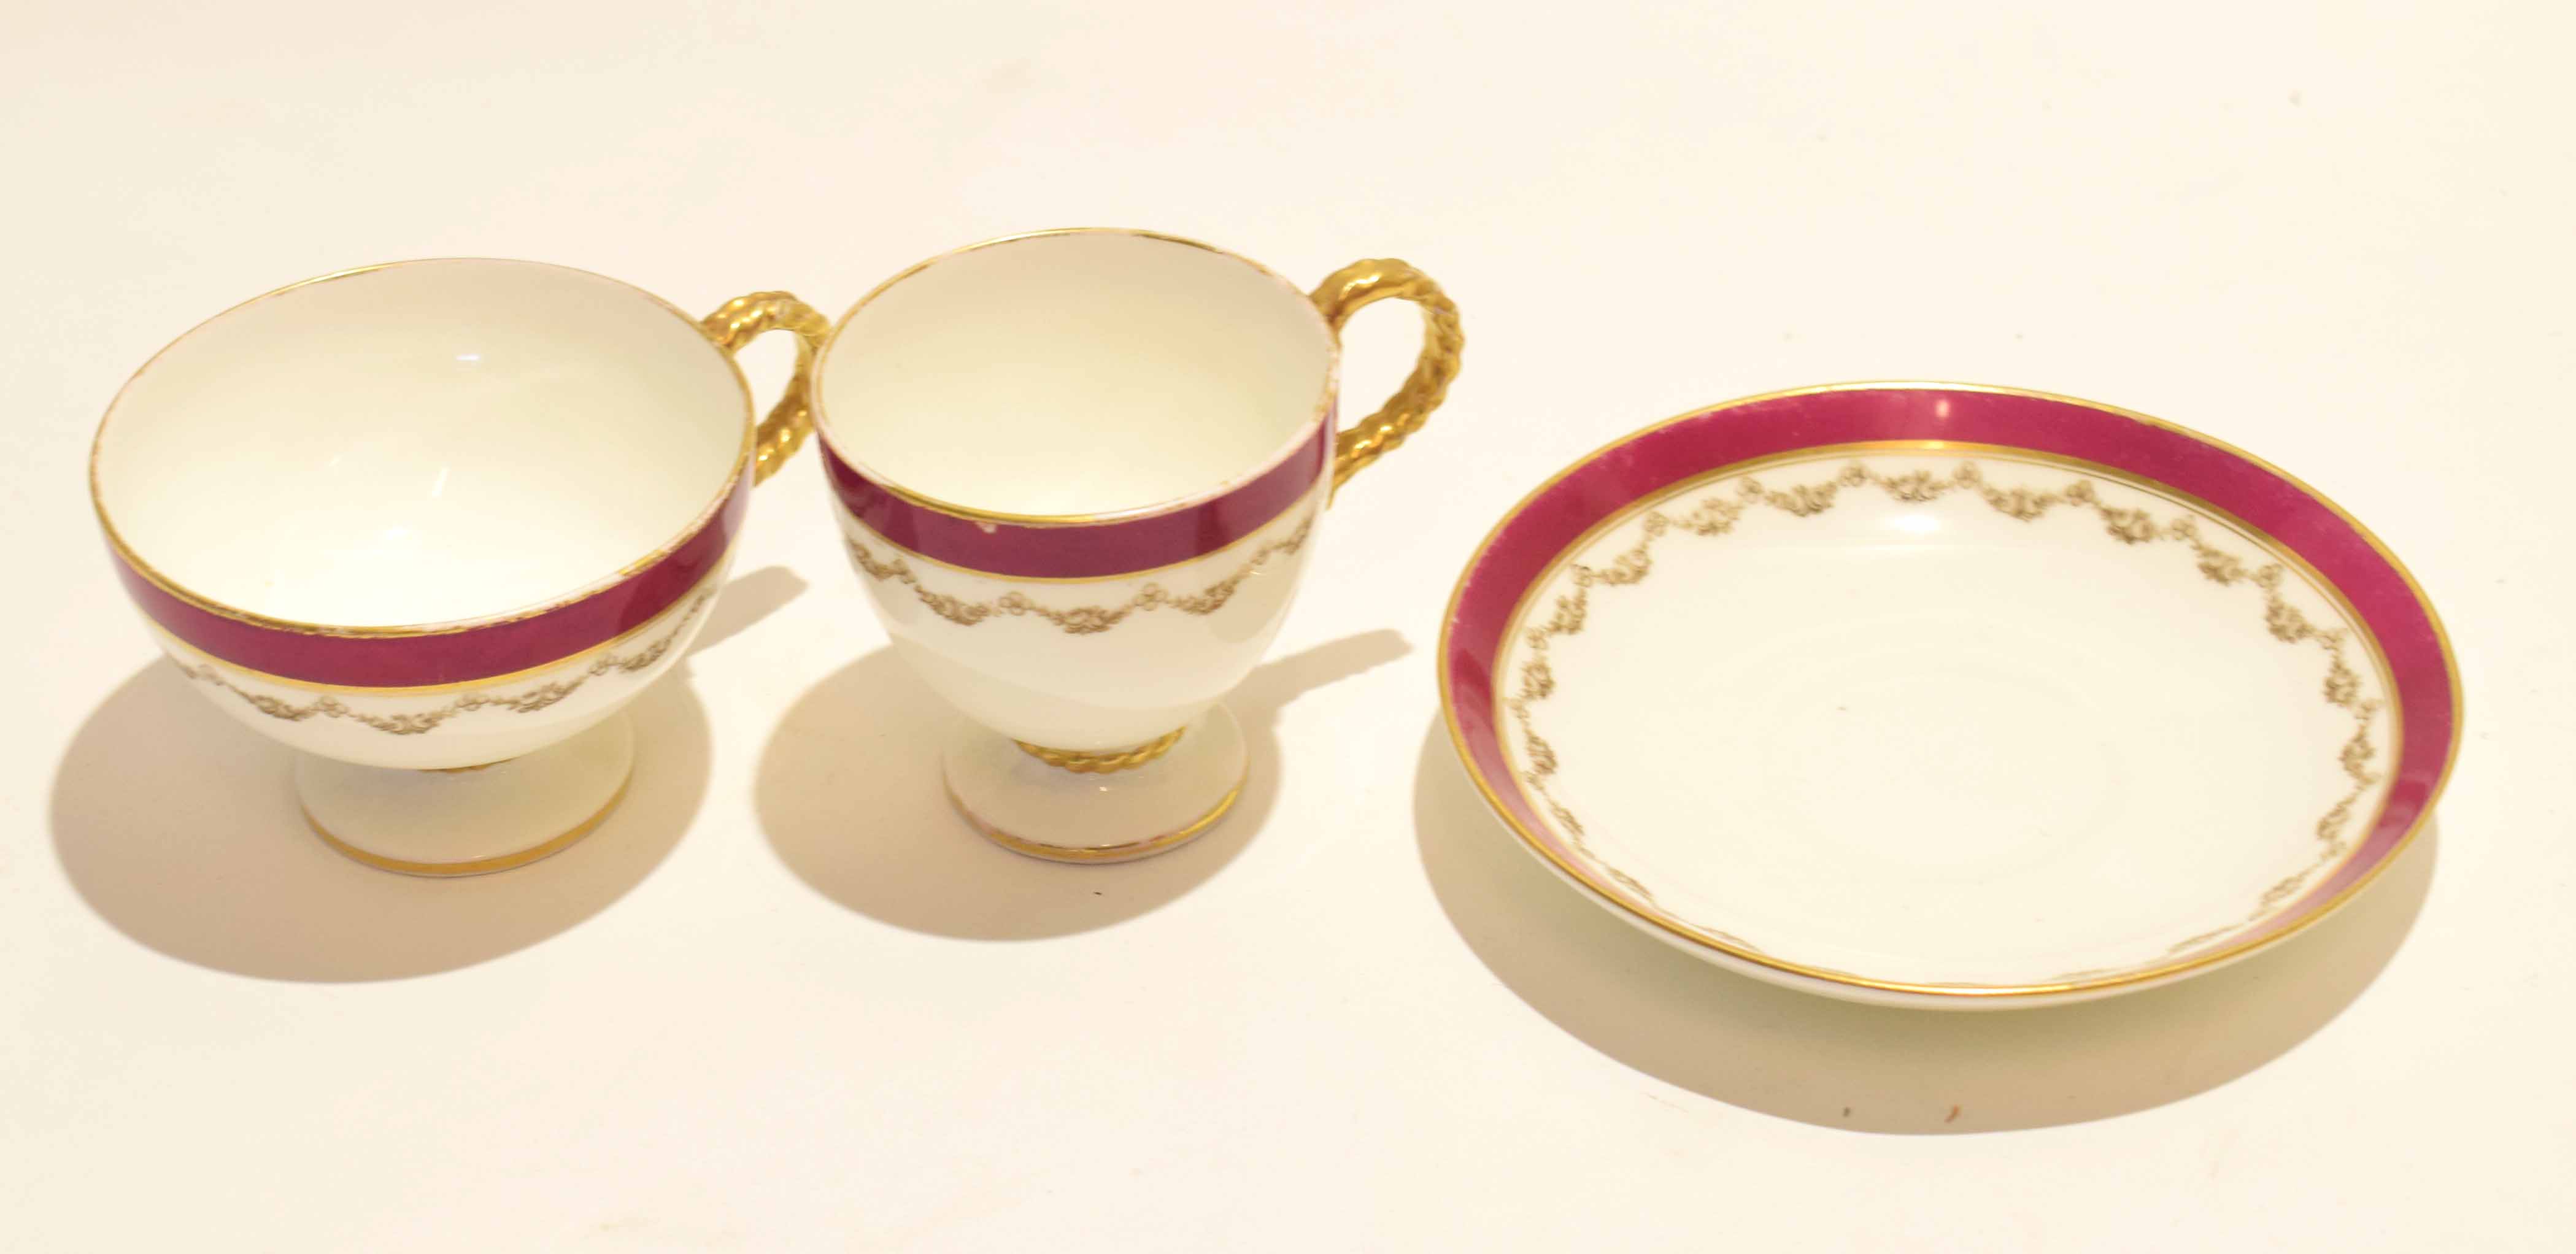 Mid-19th century porcelain trio by Brown Westhead & Moore with diamond registration marks to base